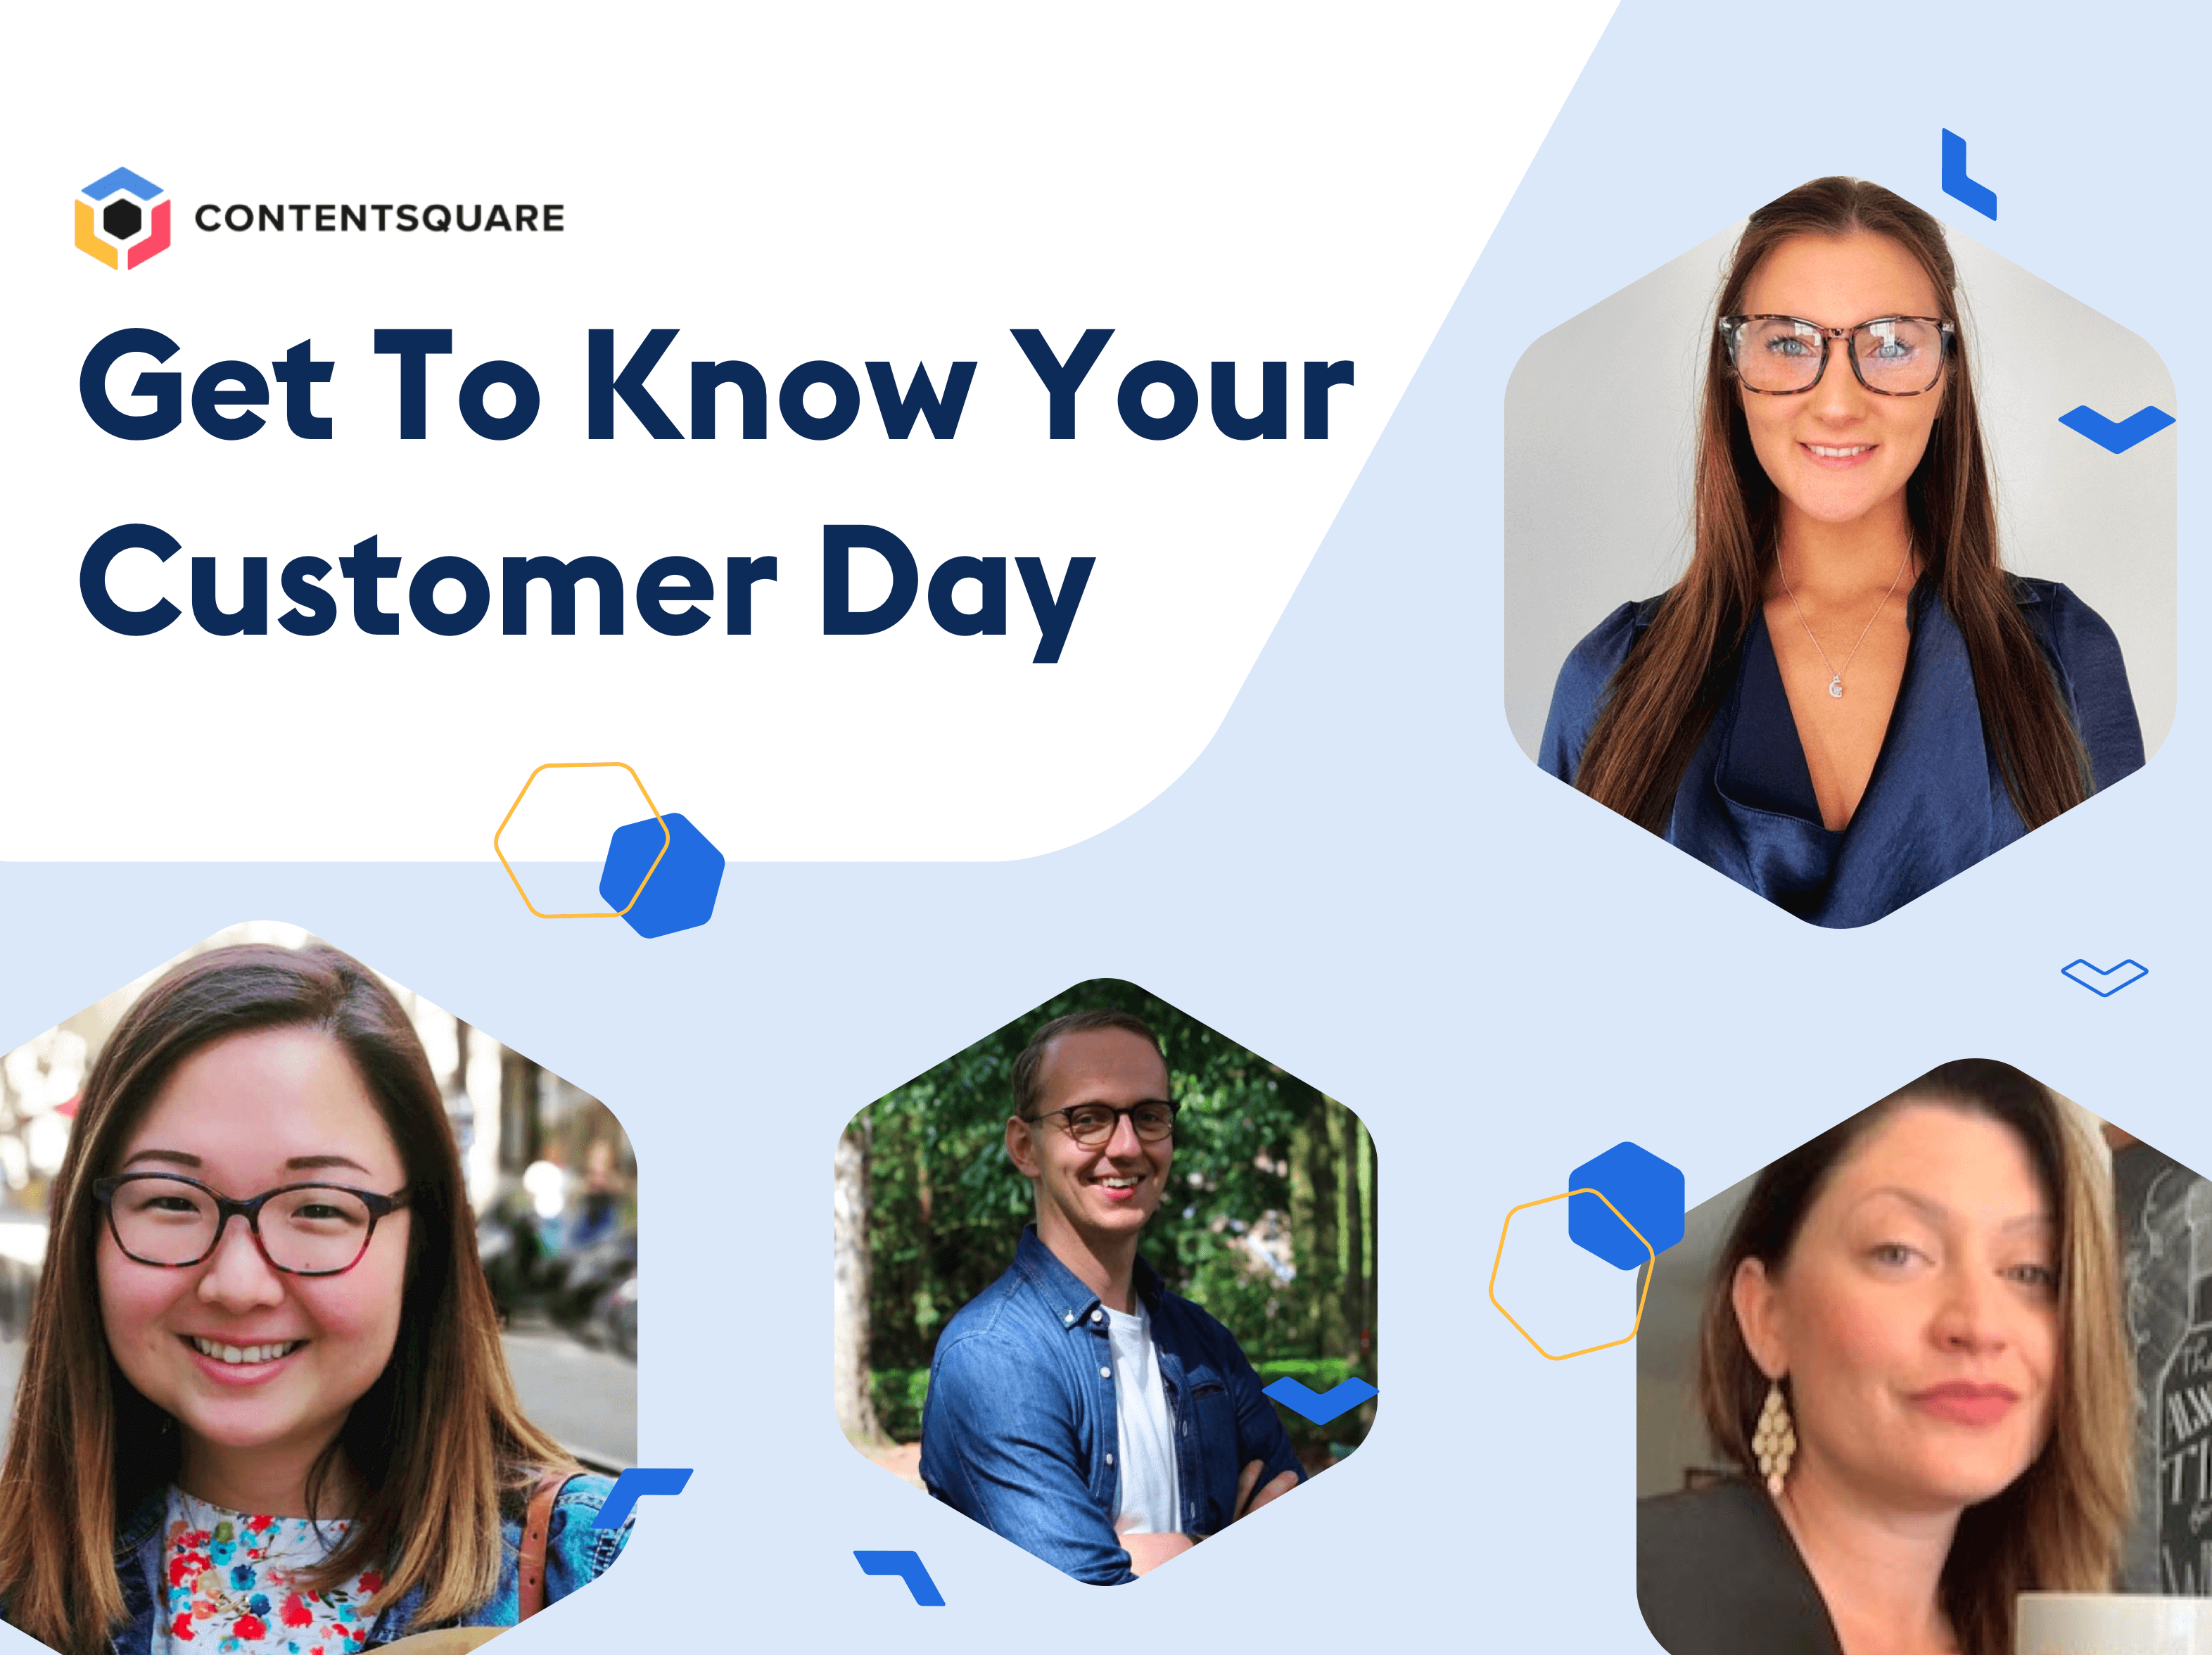 Happy Get To Know Your Customers Day from Contentsquare! Contentsquare